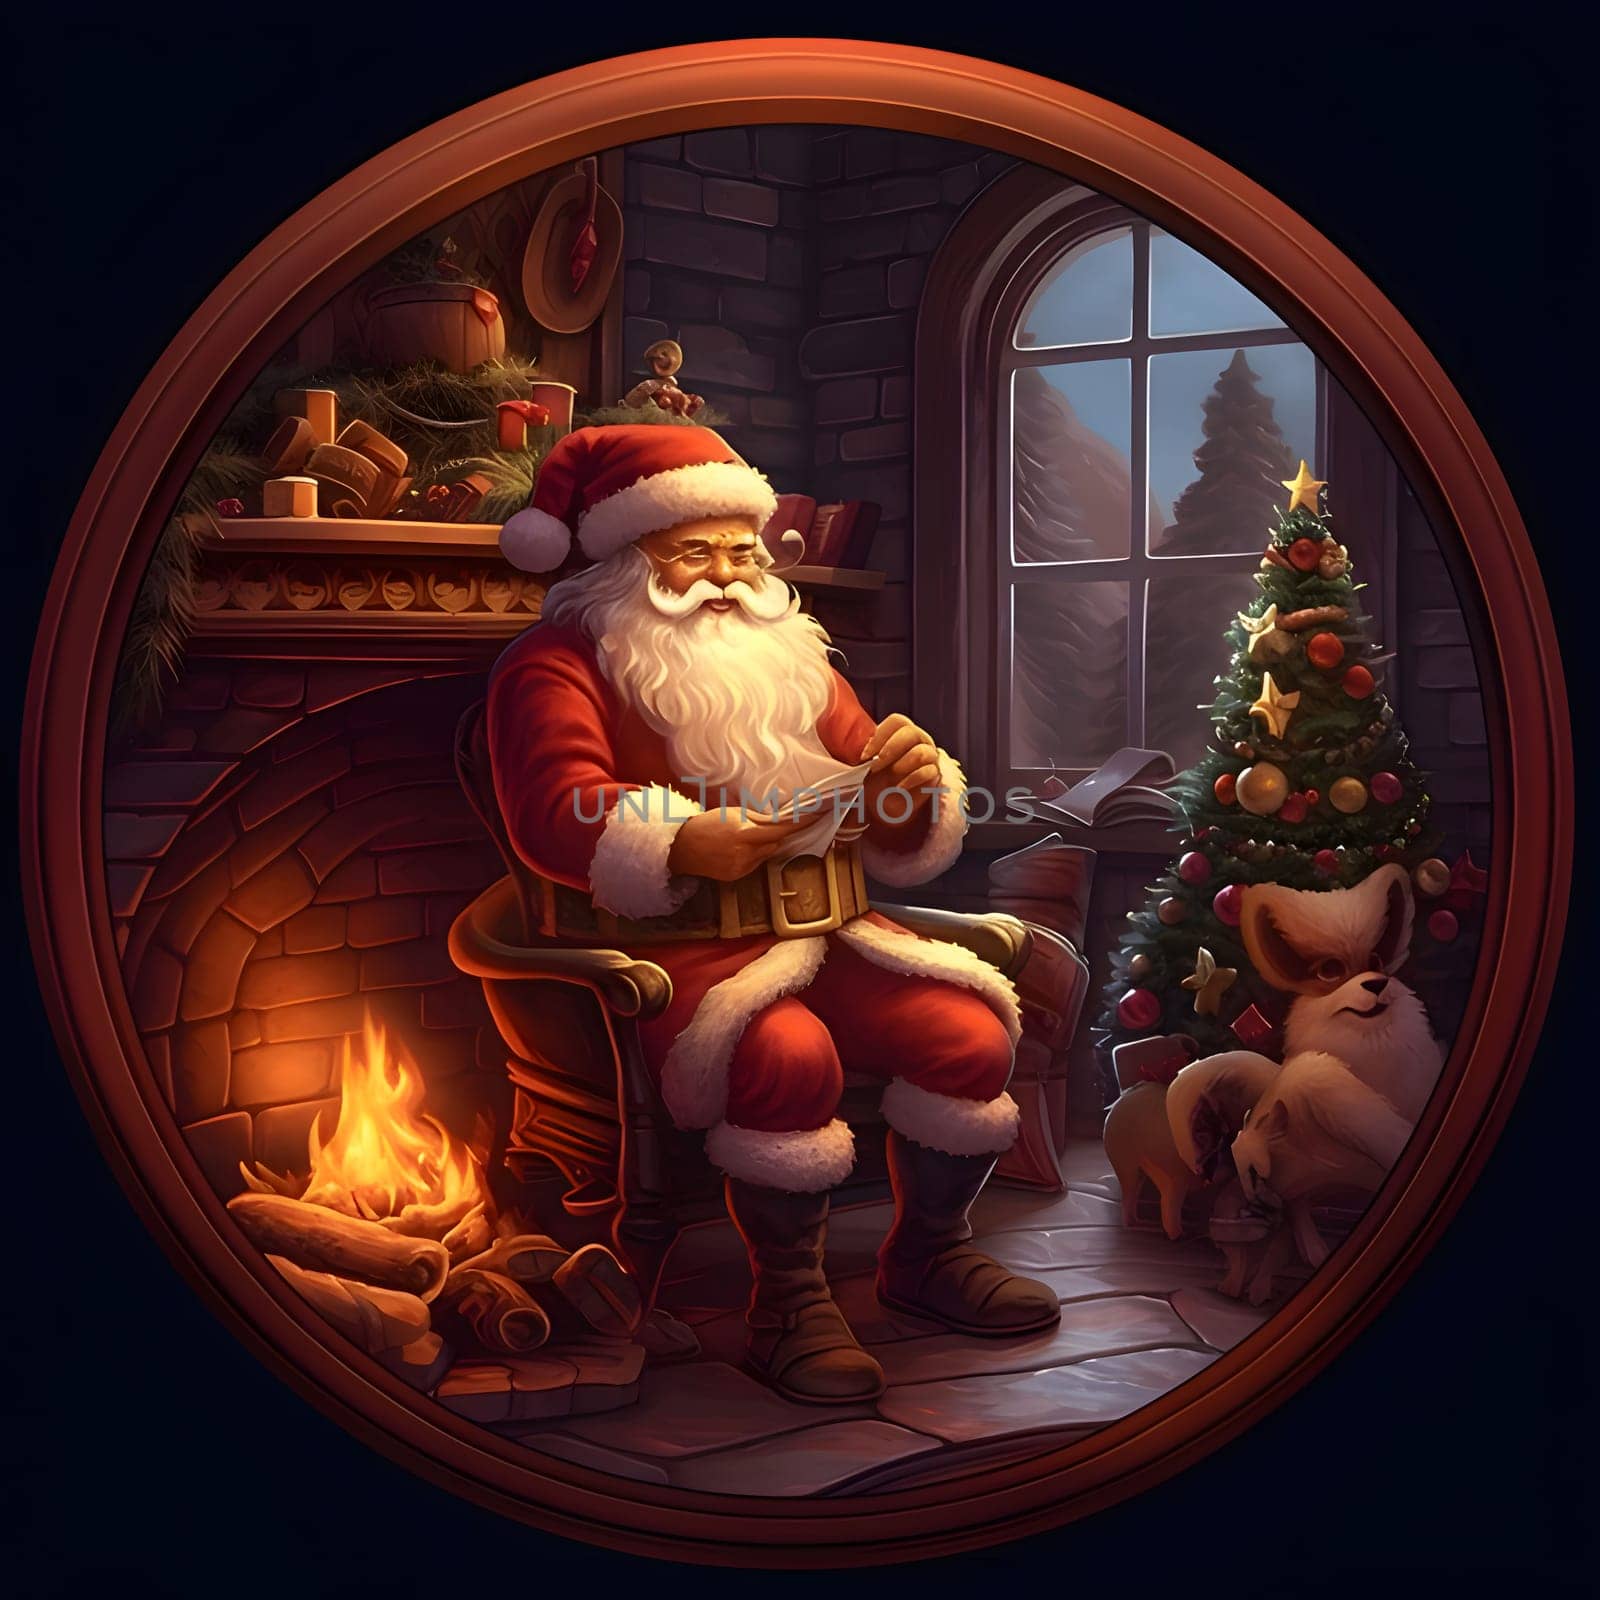 Illustration of Santa Claus reading a letter by the fireplace in a circle. Xmas tree as a symbol of Christmas of the birth of the Savior. by ThemesS